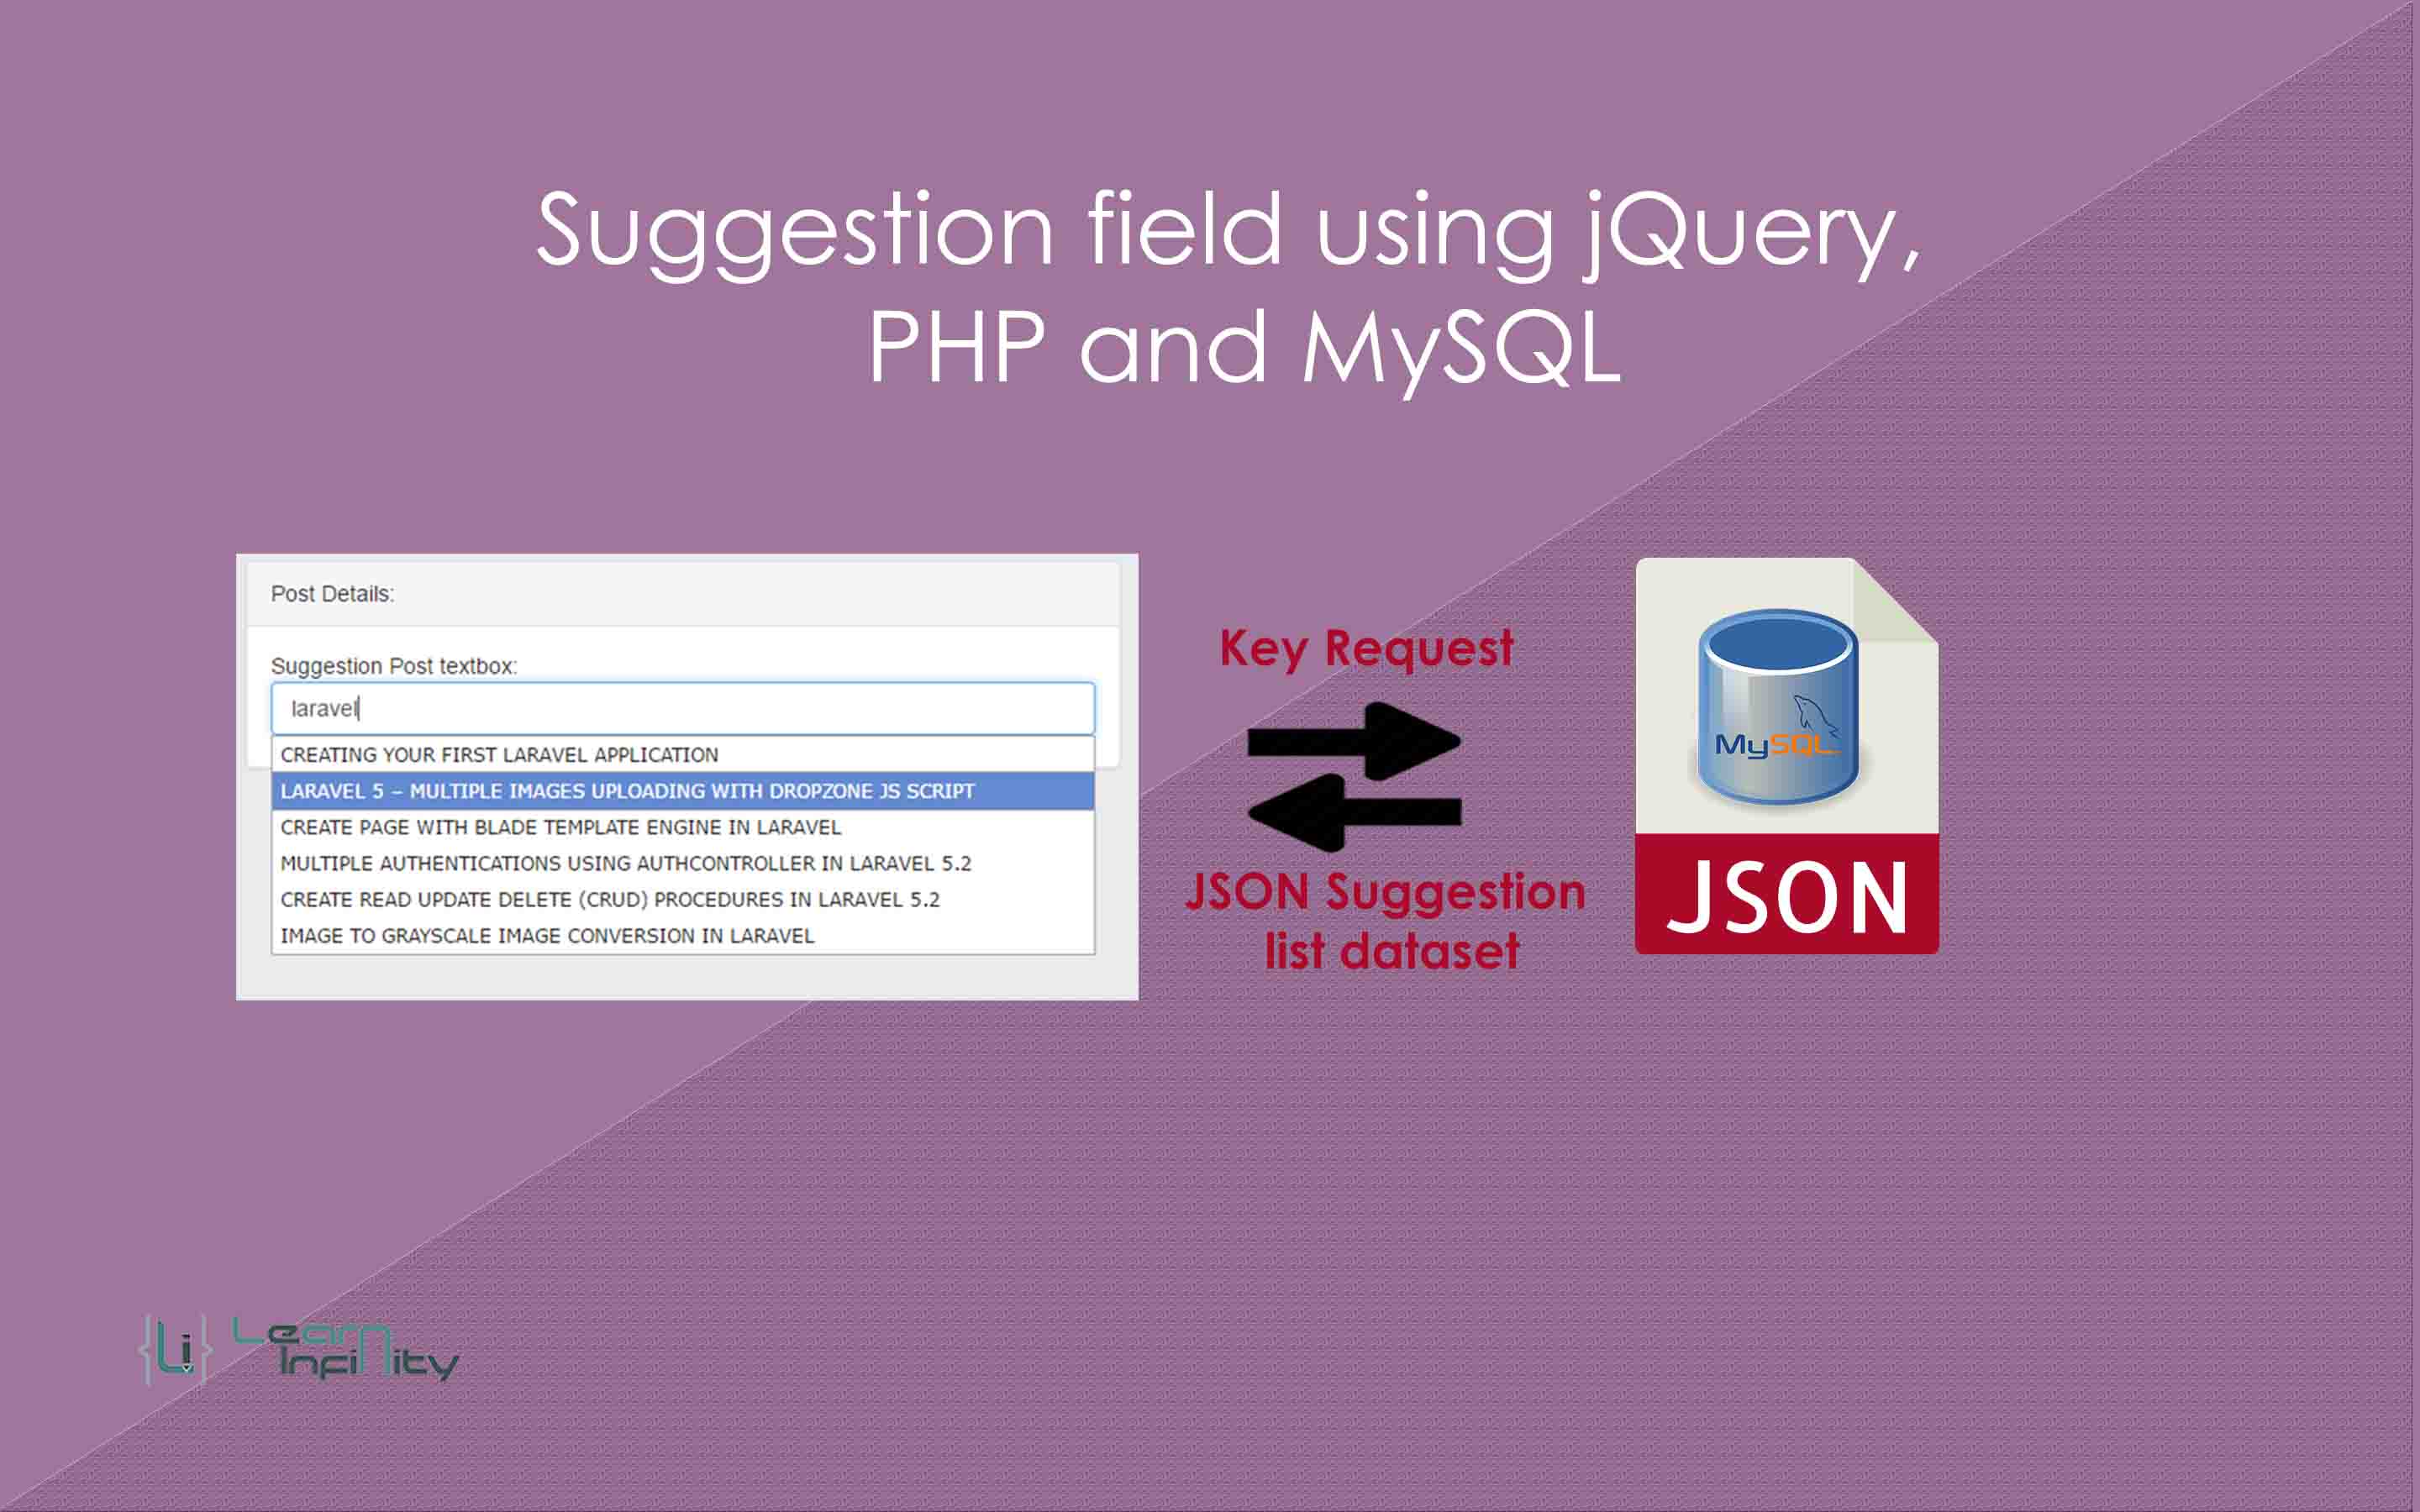 Suggestion field using jQuery, PHP and MySQL